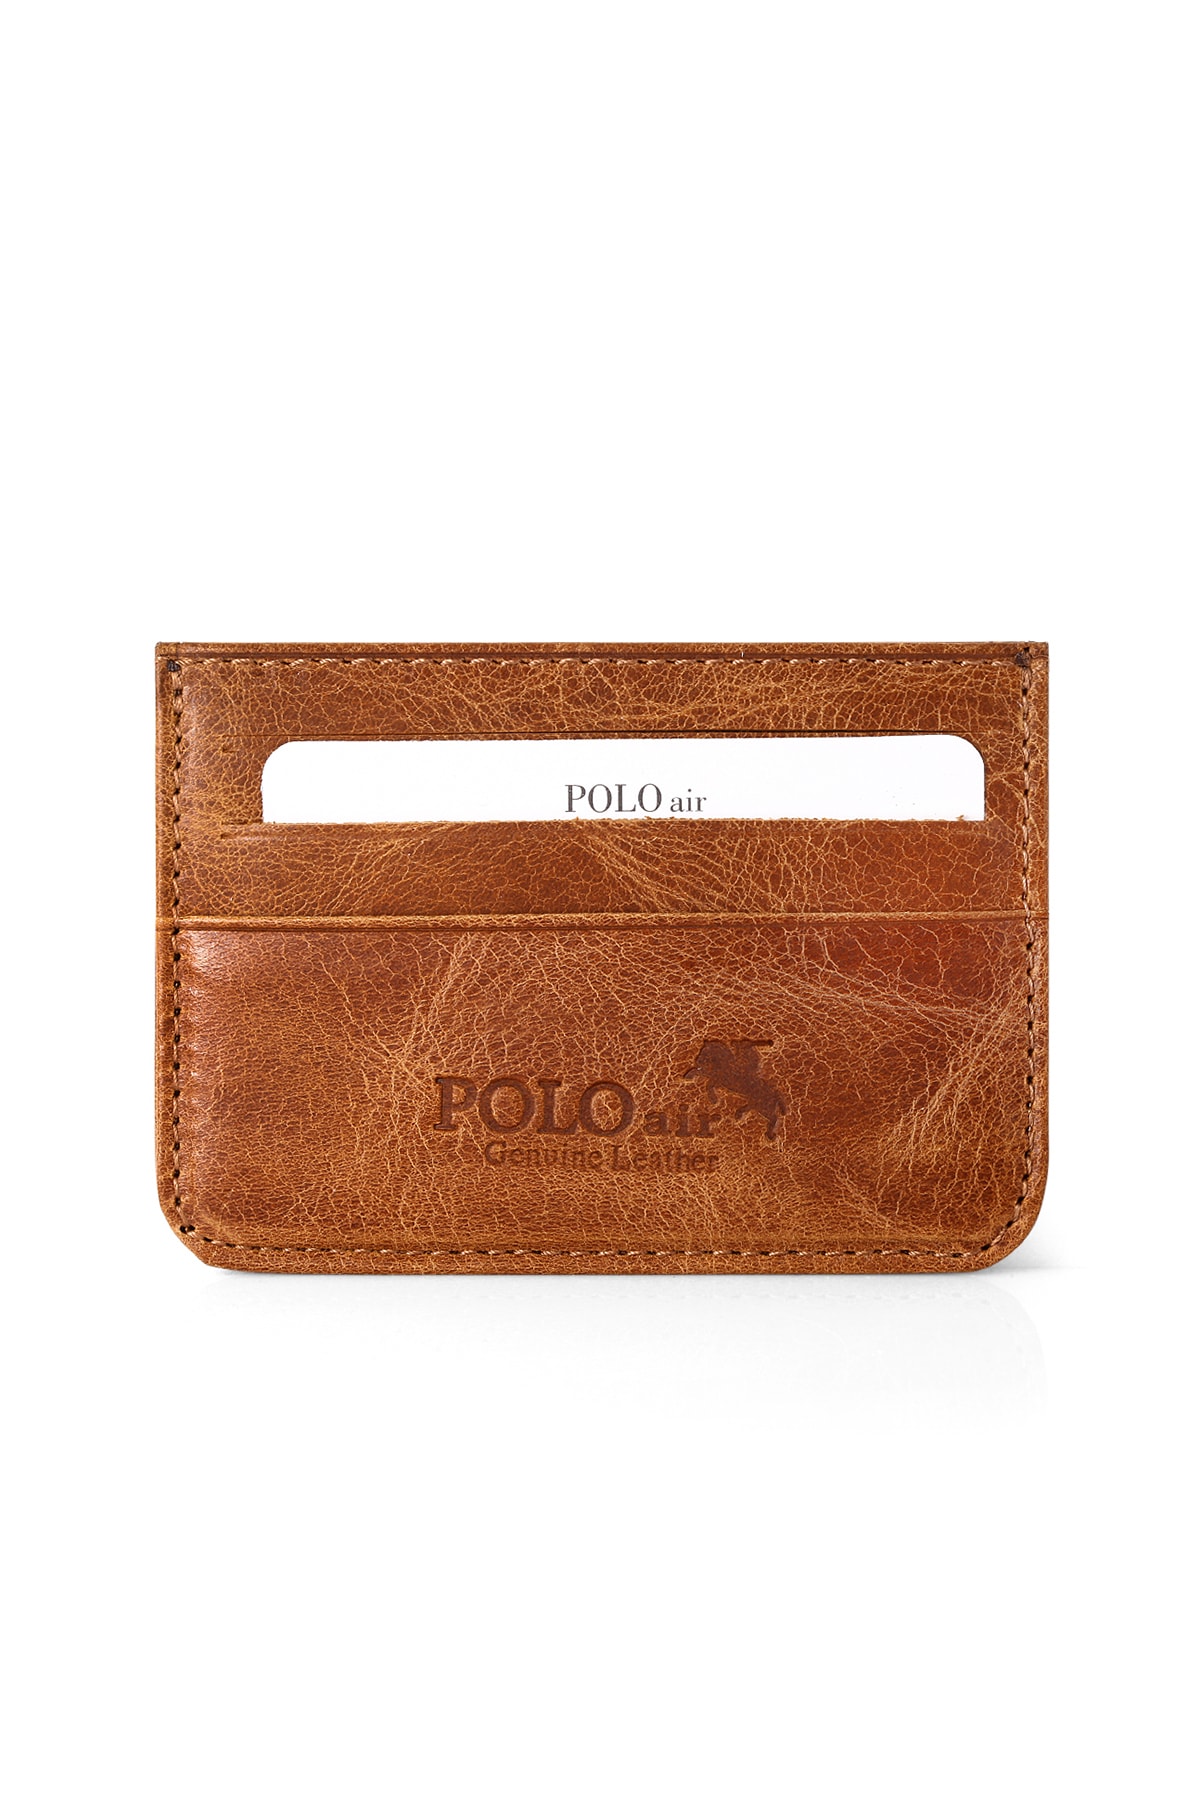 Polo Air Genuine Leather And Tan Credit Card Holder In Its Box